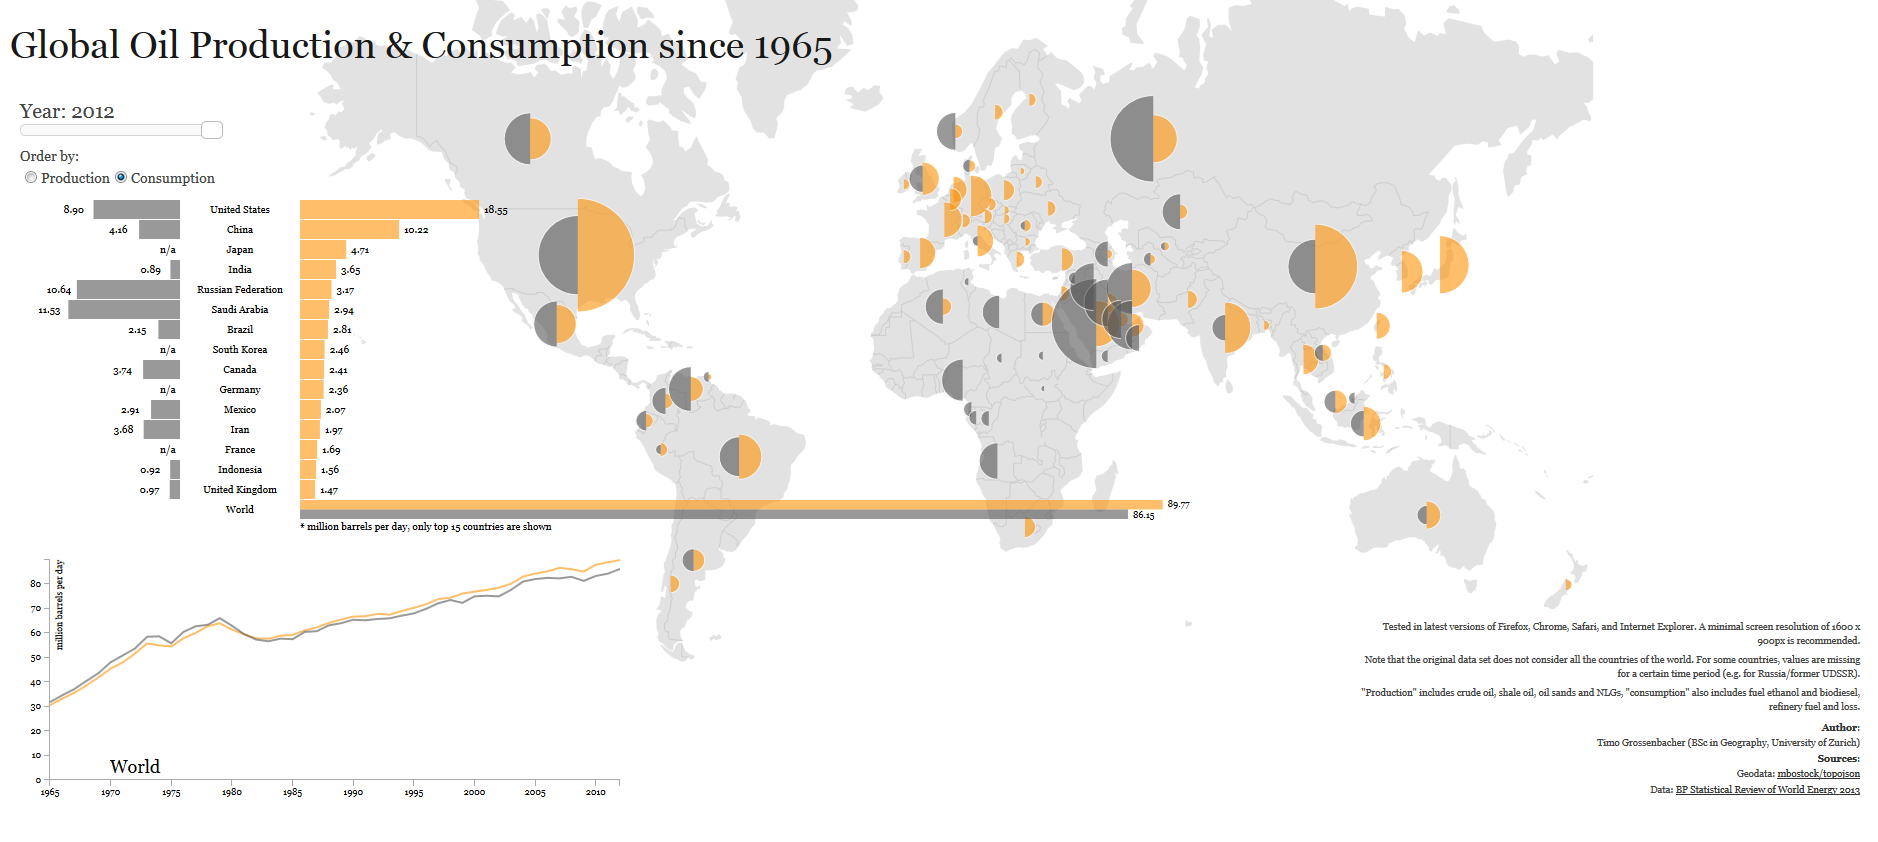 oil production and consumption since 1965